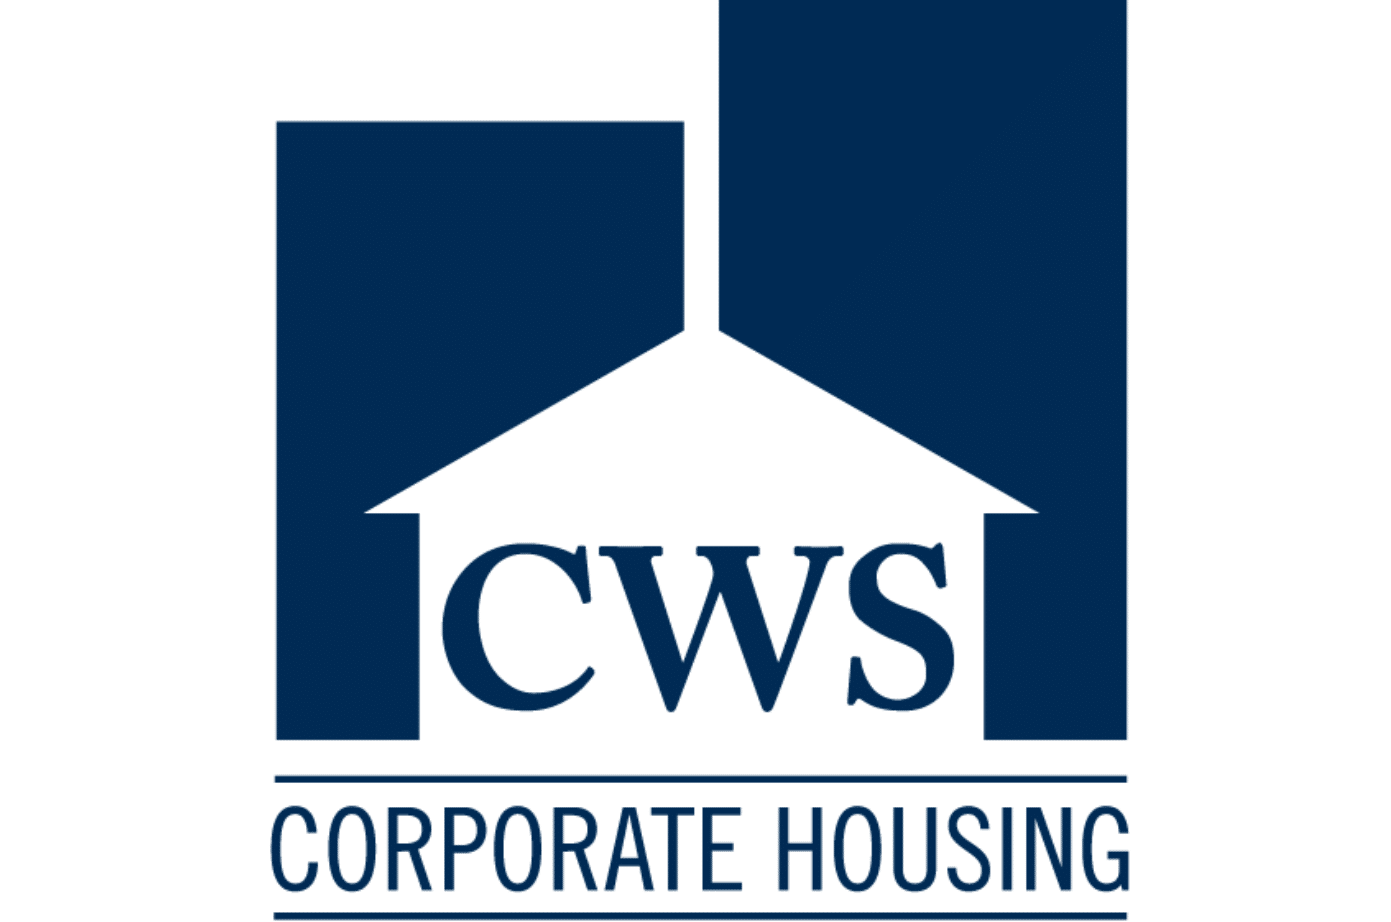 CWS Corporate Housing is Nominated for a Prestigious Cartus Masters Cup Award at the 2023 Global Network Conference